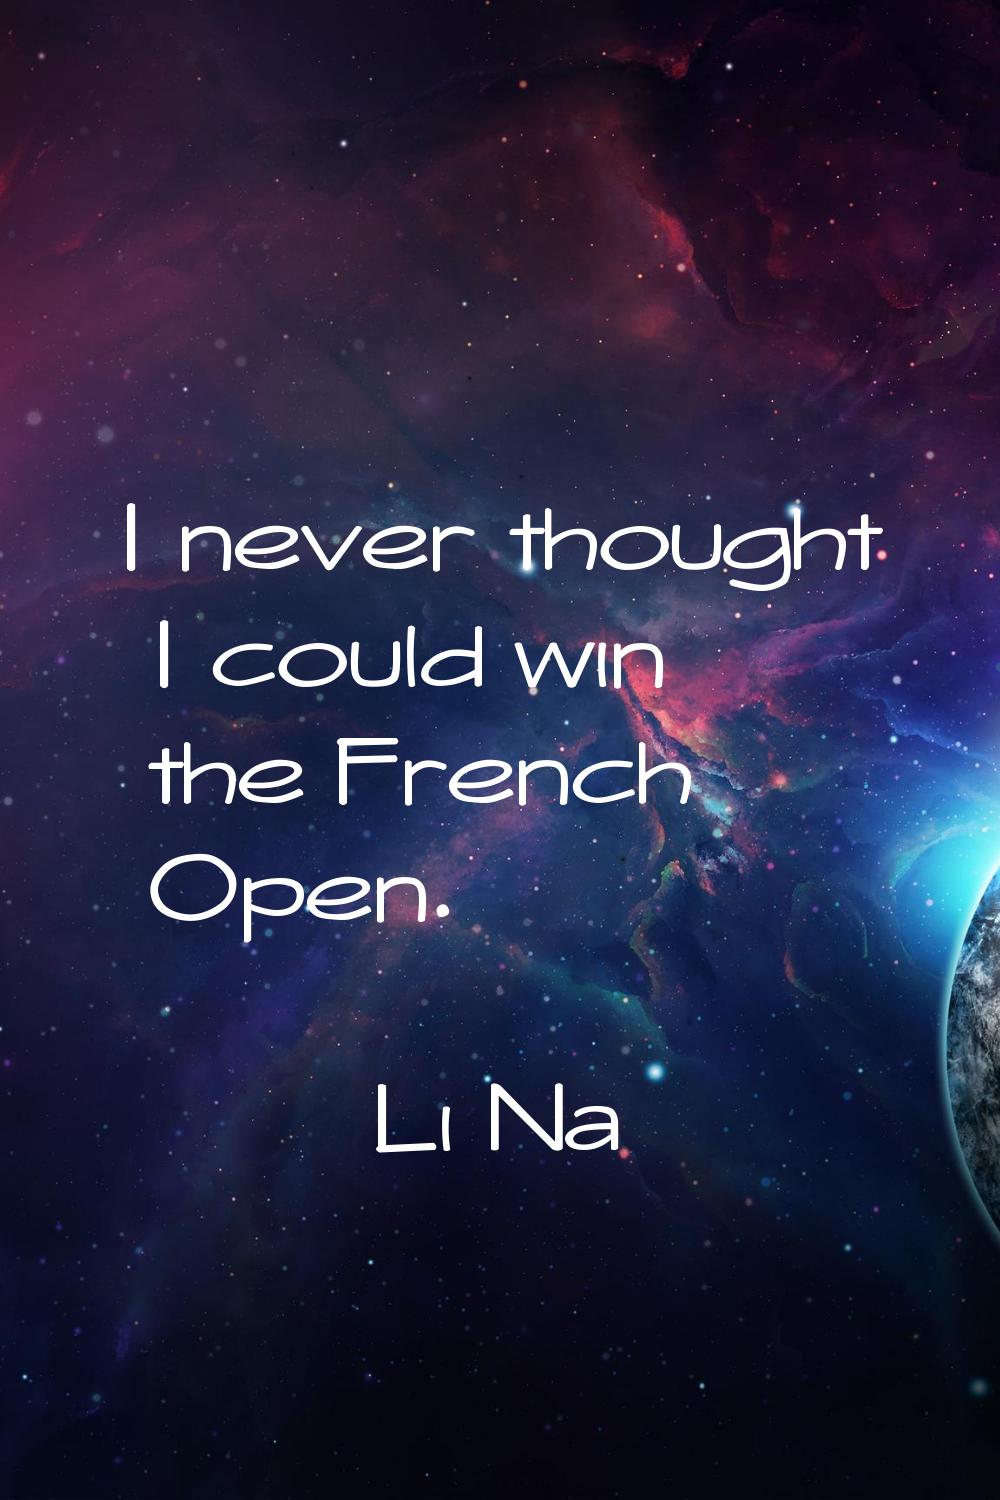 I never thought I could win the French Open.